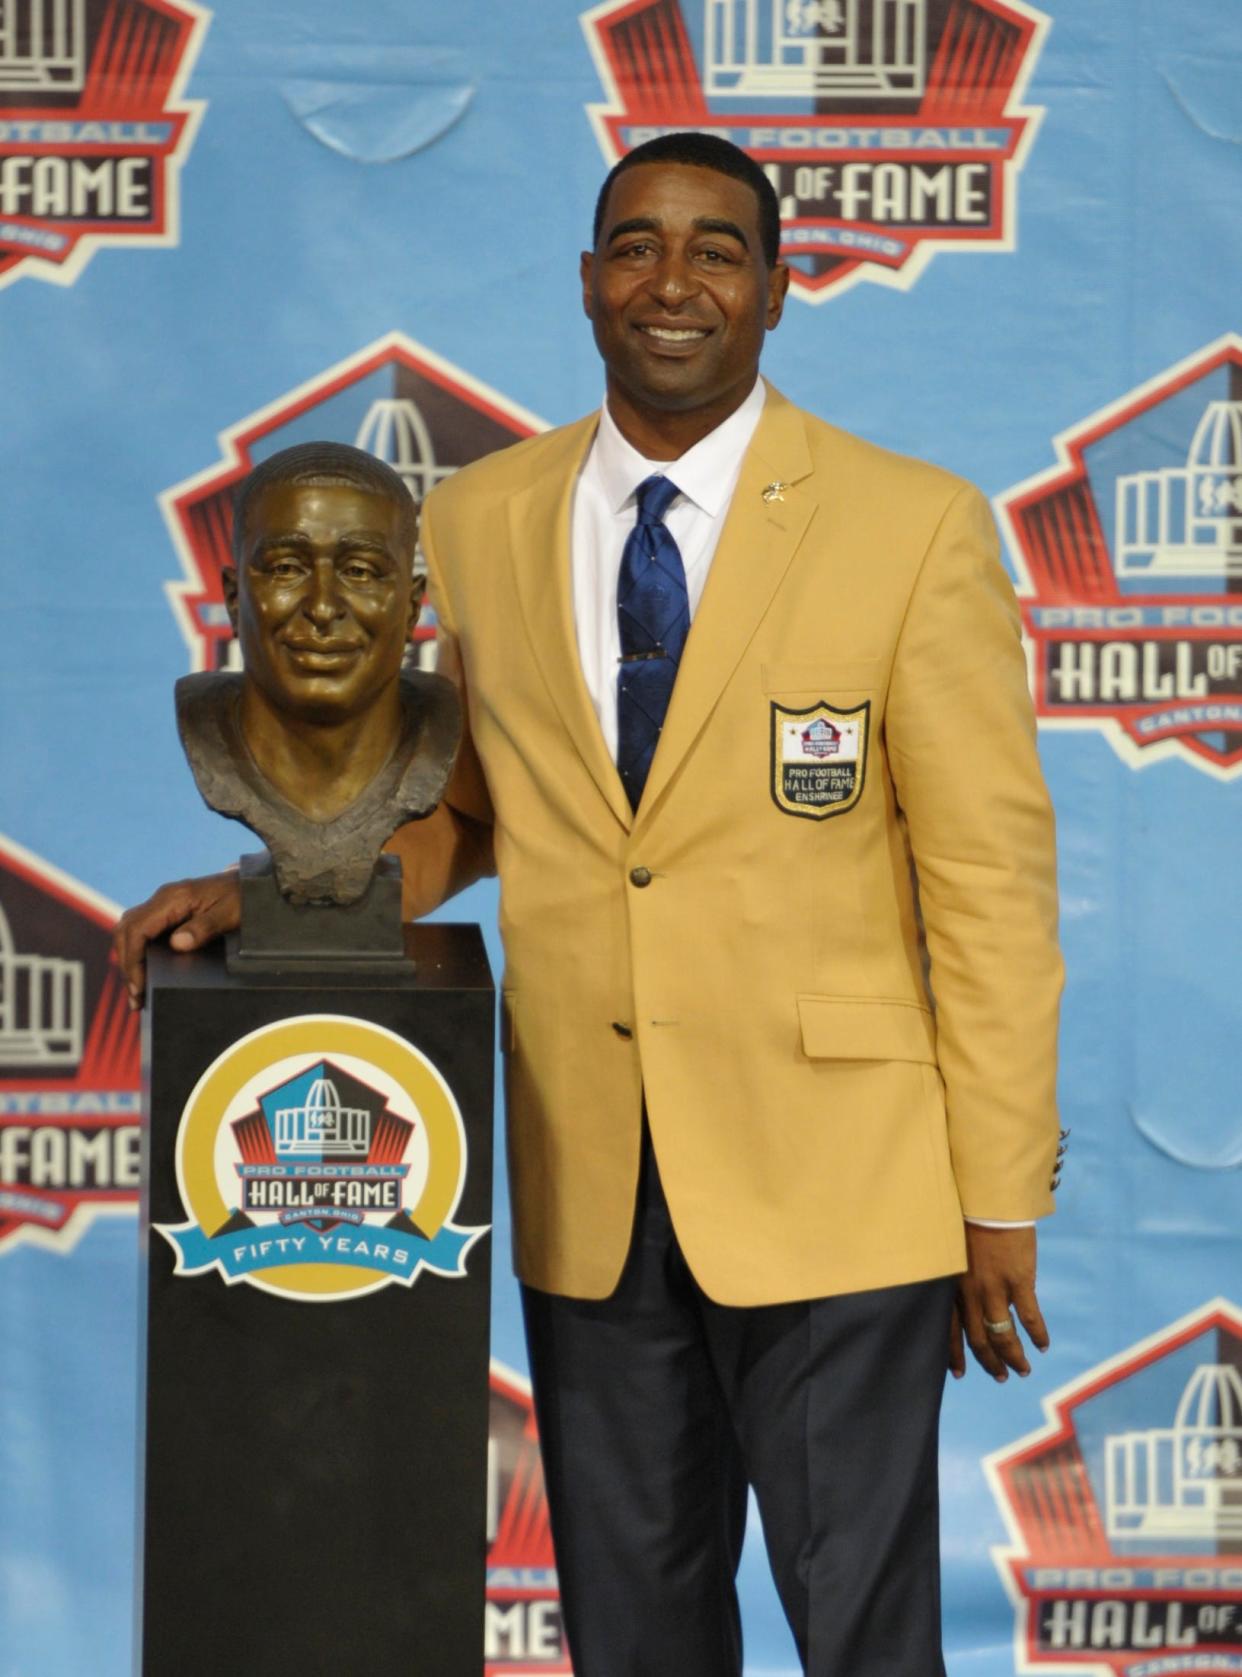 Inductee Cris Carter poses with his bust during the induction ceremony at the Pro Football Hall of Fame Saturday, Aug. 3, 2013, in Canton, Ohio. (AP Photo/David Richard)